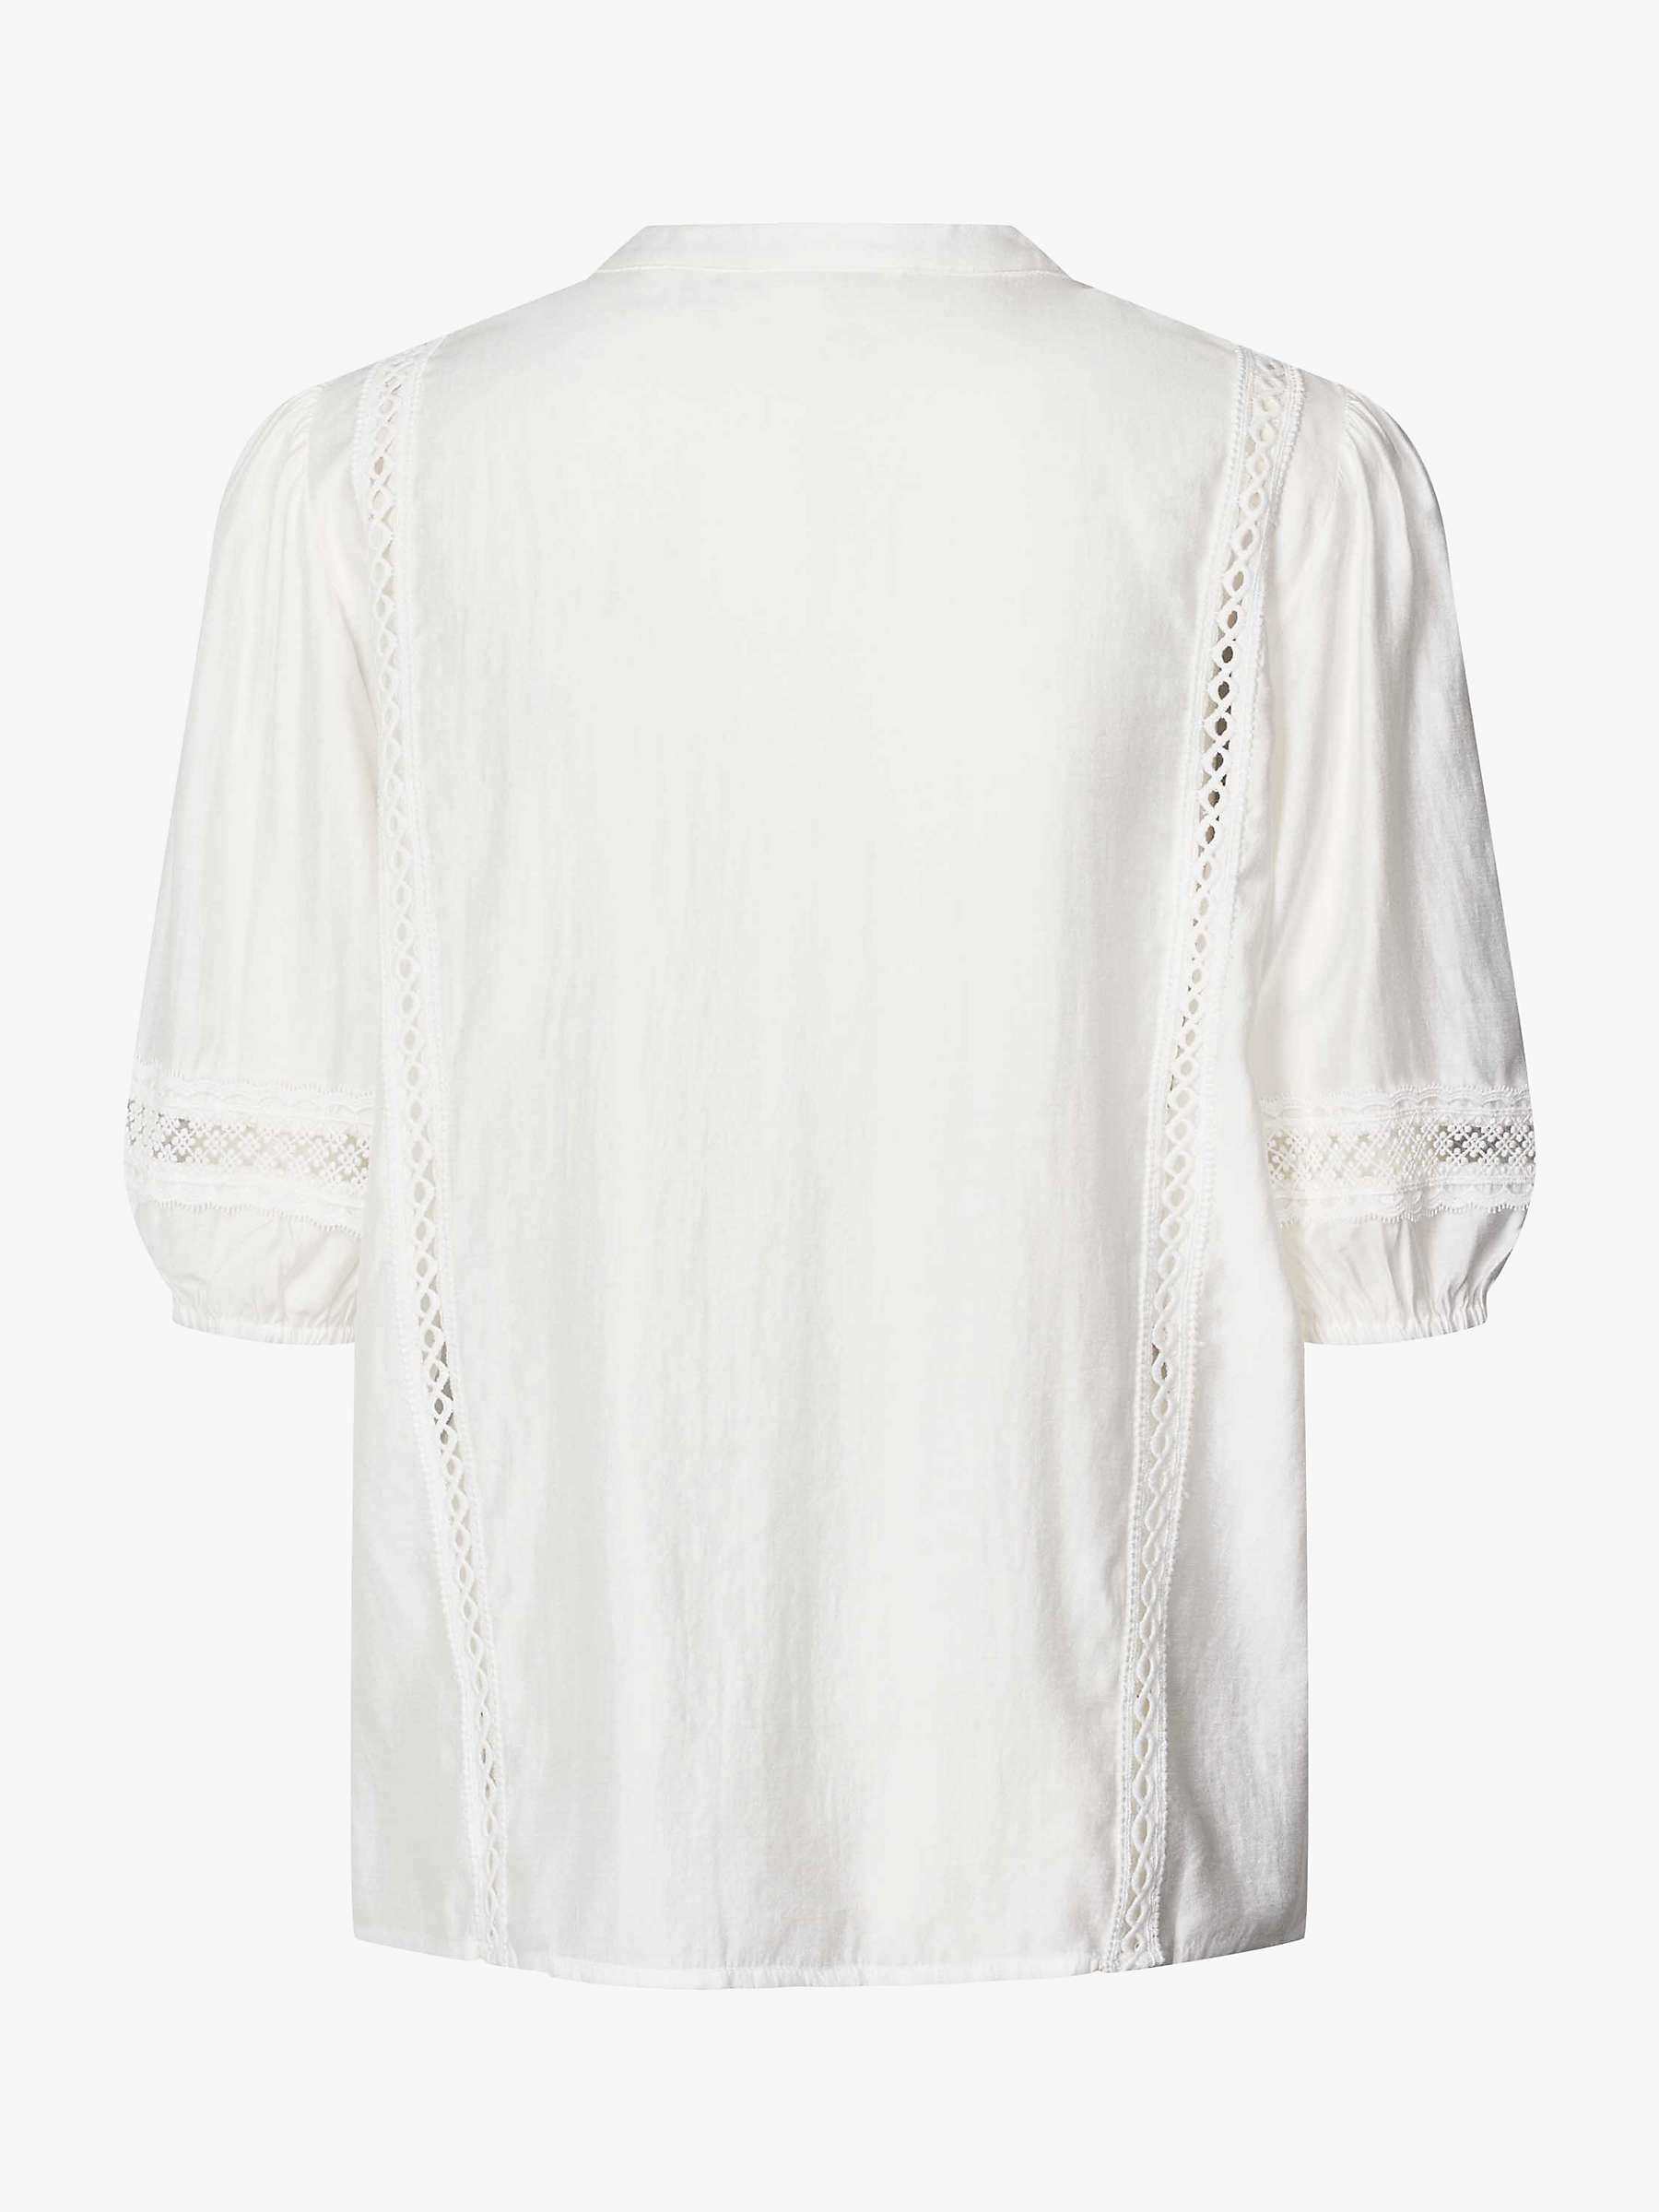 Lollys Laundry Faida Embroidered Notch Neck Blouse, White at John Lewis ...